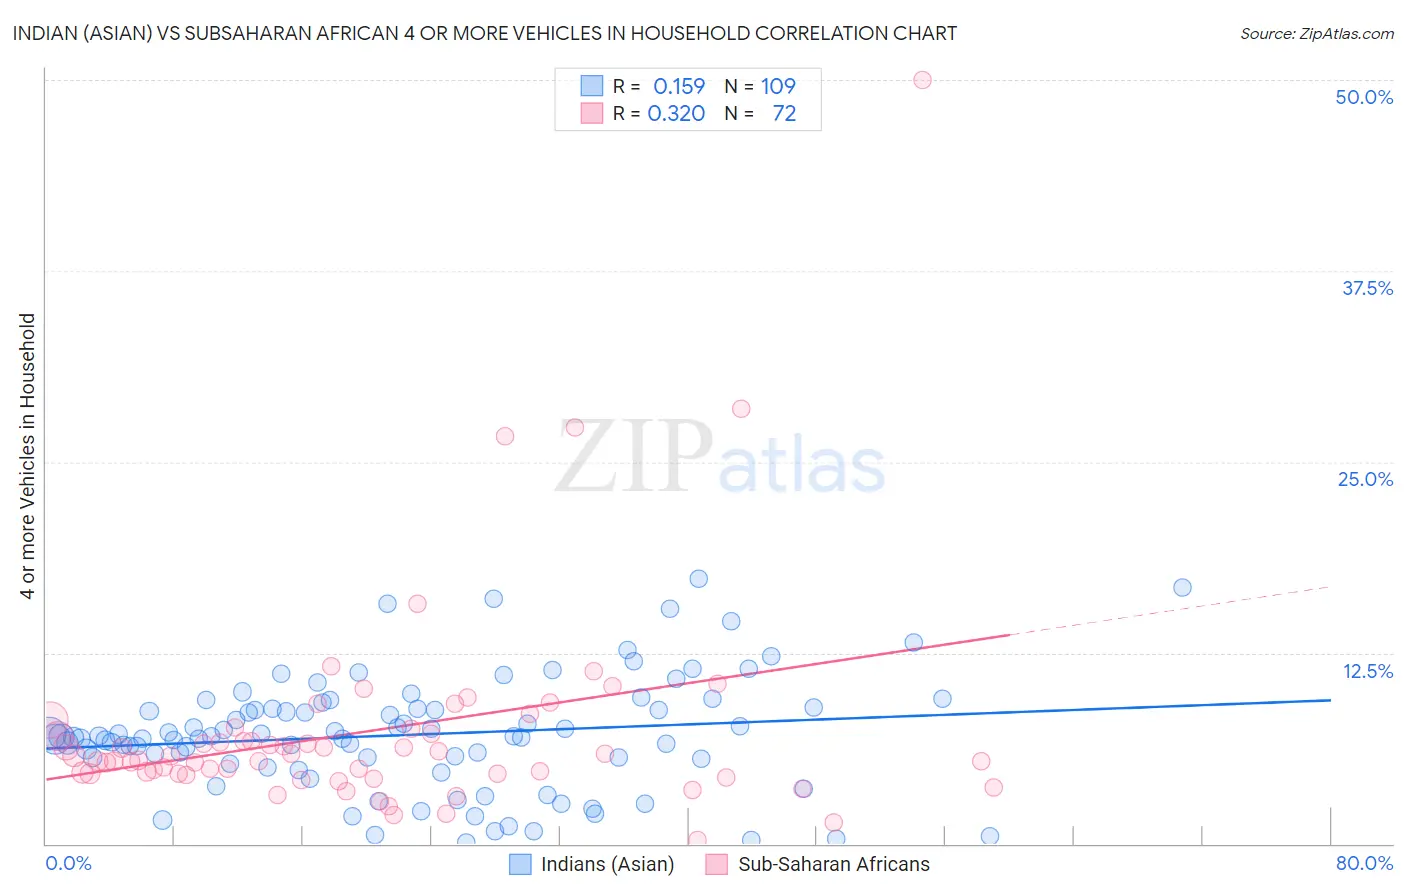 Indian (Asian) vs Subsaharan African 4 or more Vehicles in Household